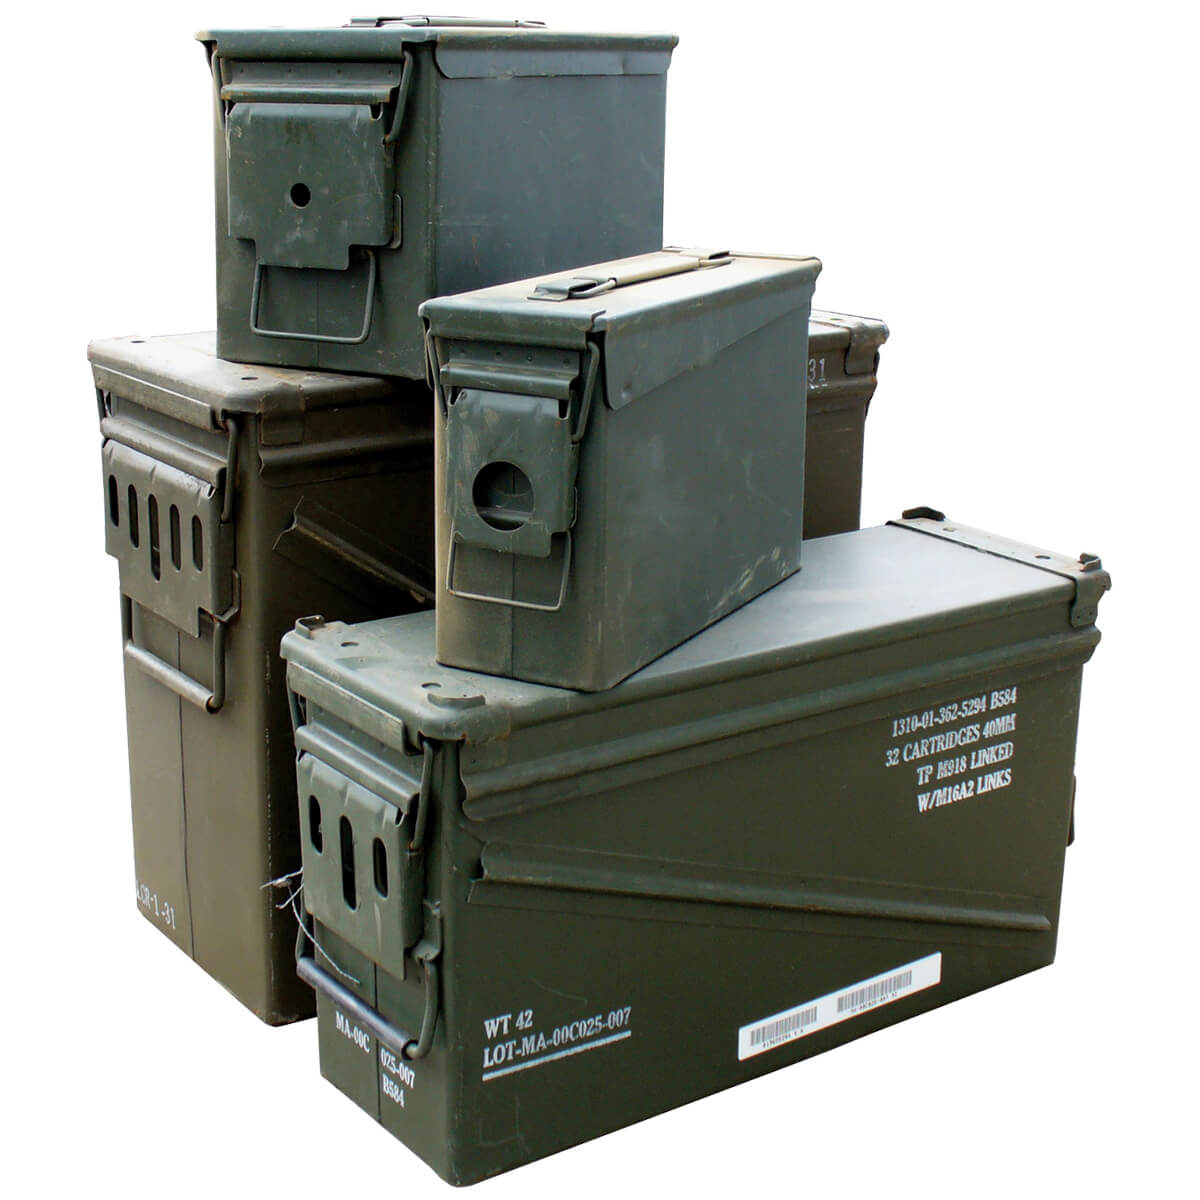 Find Ammo Boxes at a Store Near You